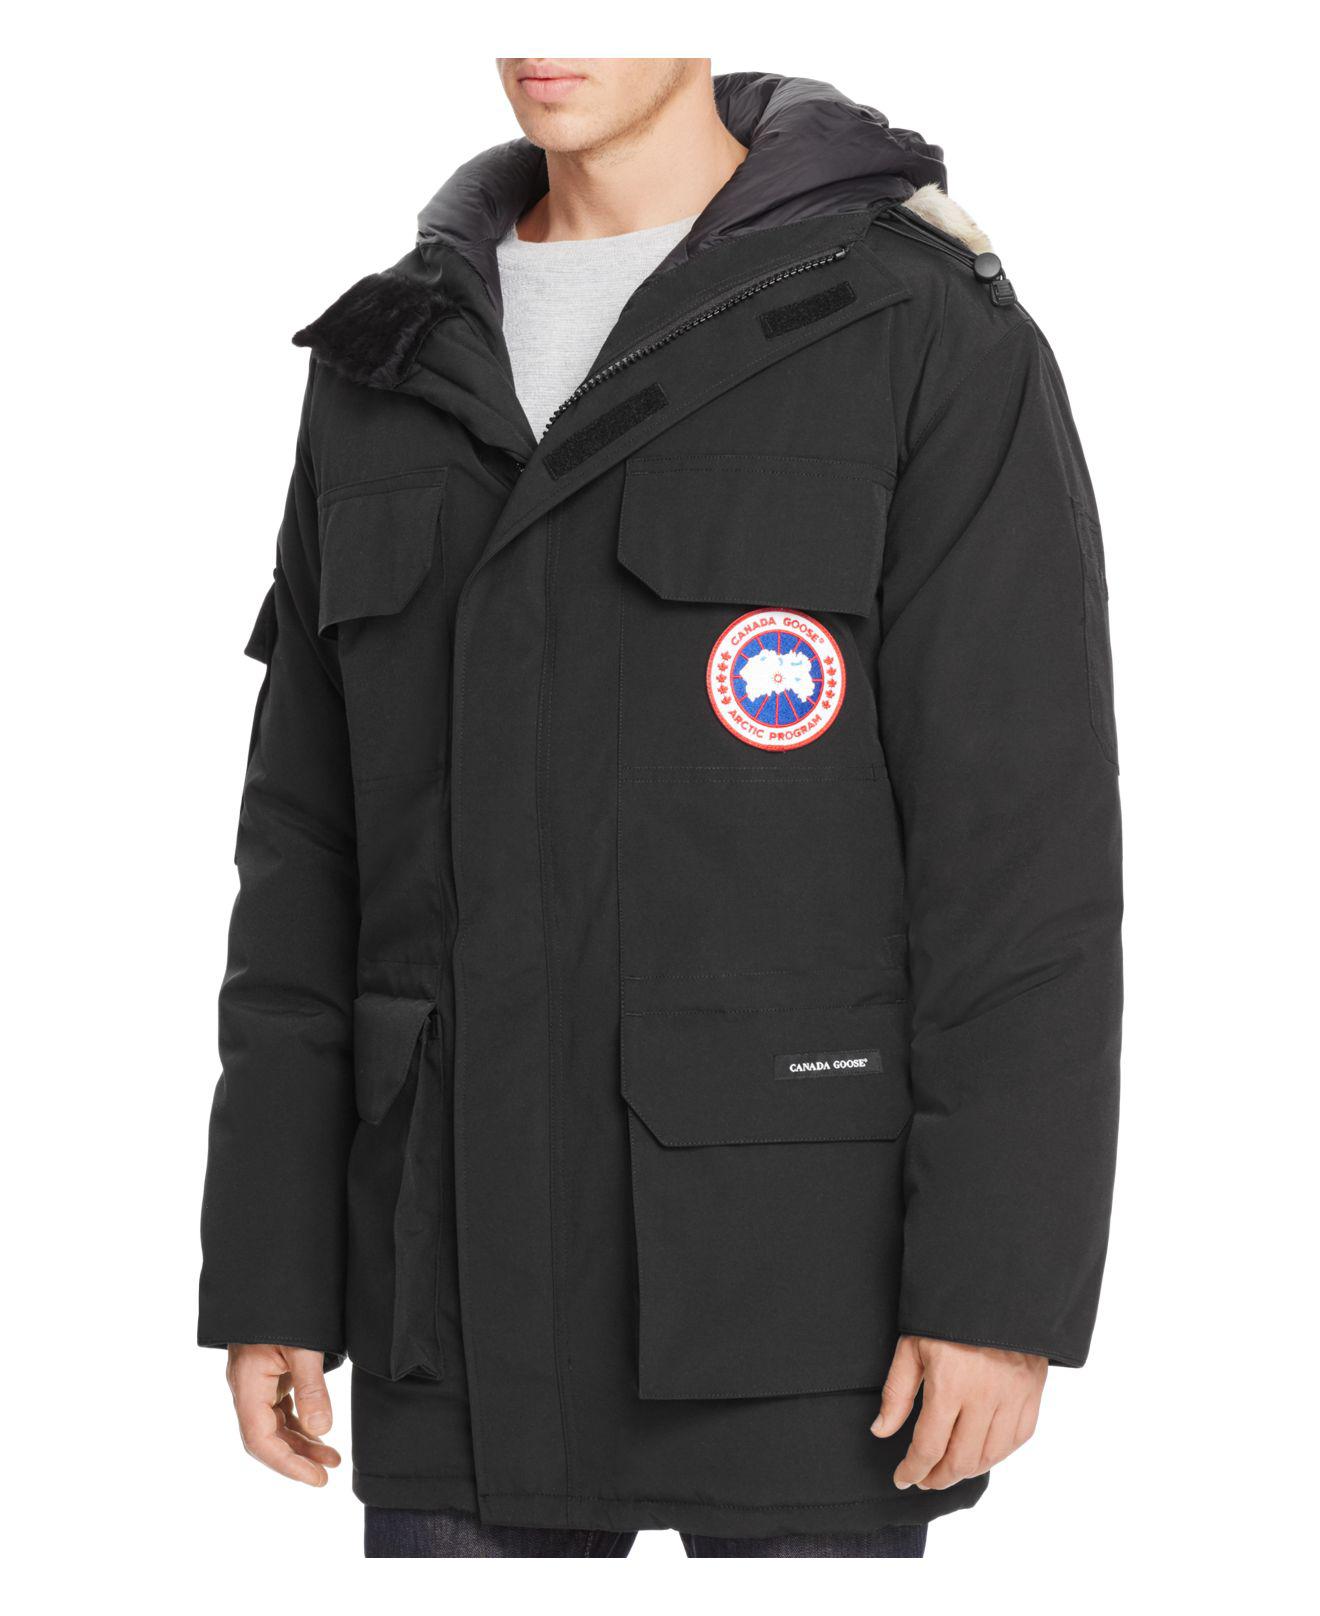 Canada Goose Expedition Down Parka in Black for Men - Lyst